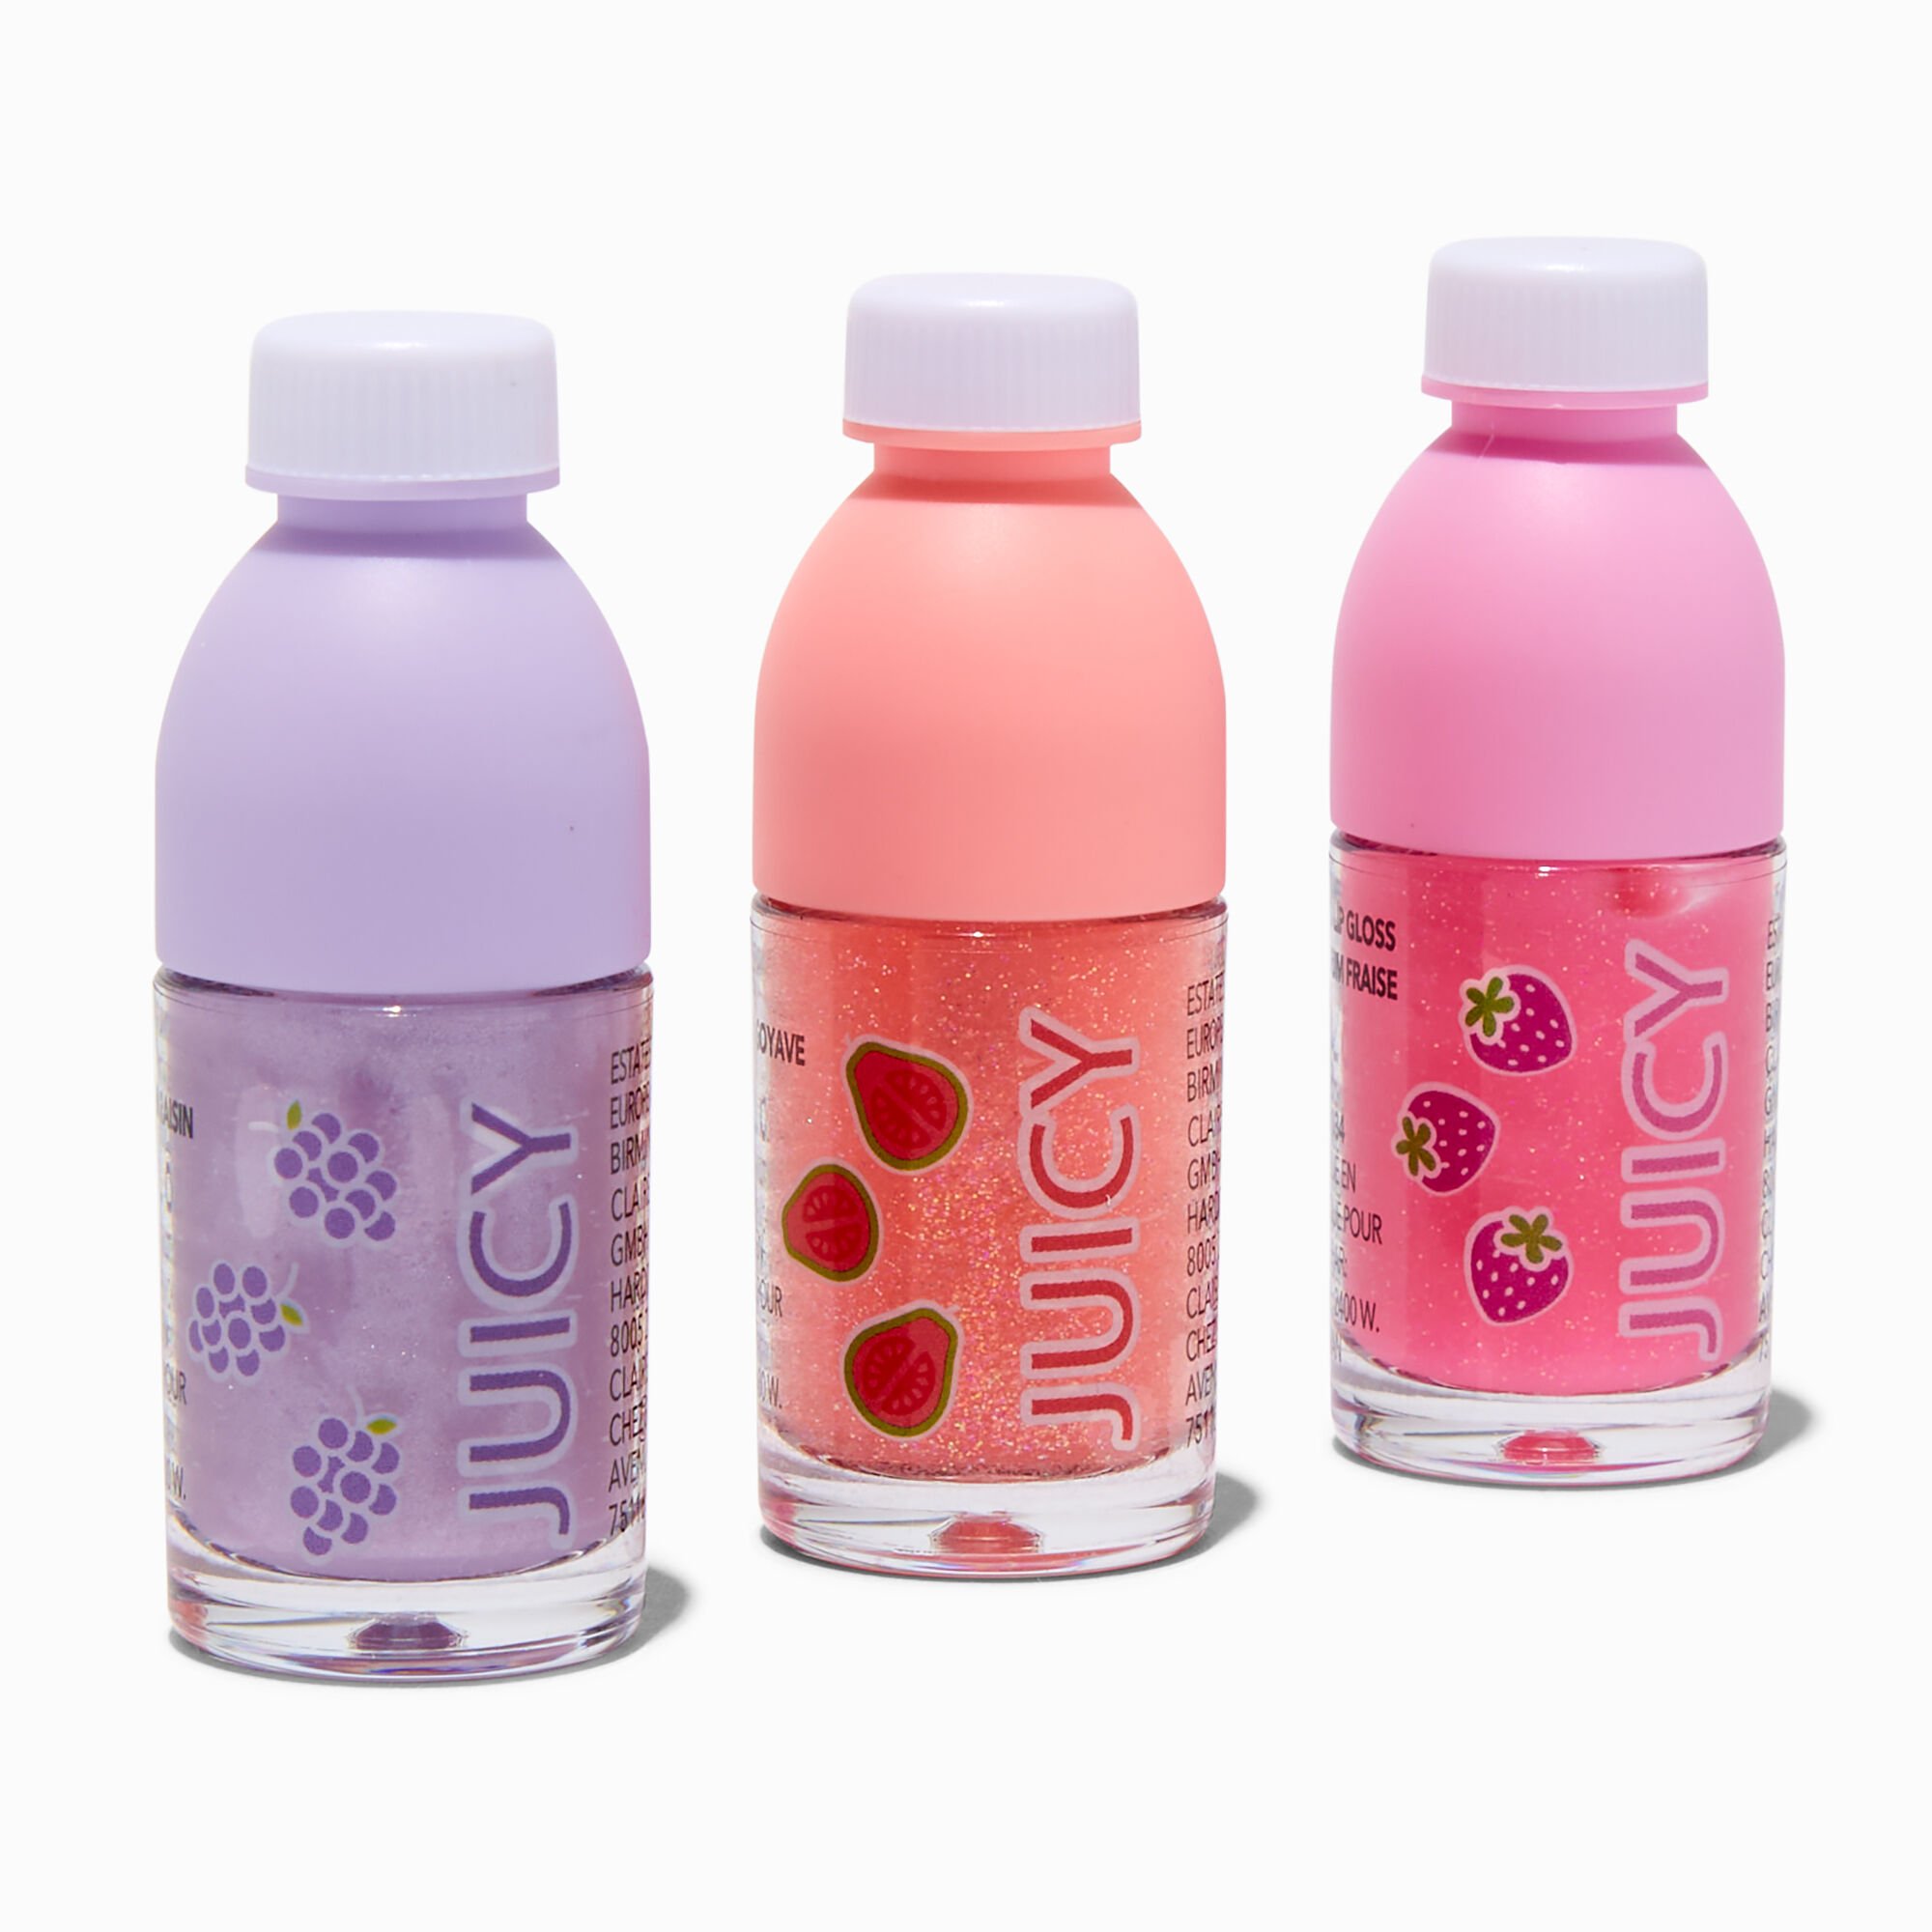 View Claires Boba Water Juicy Lip Balm Set 3 Pack information